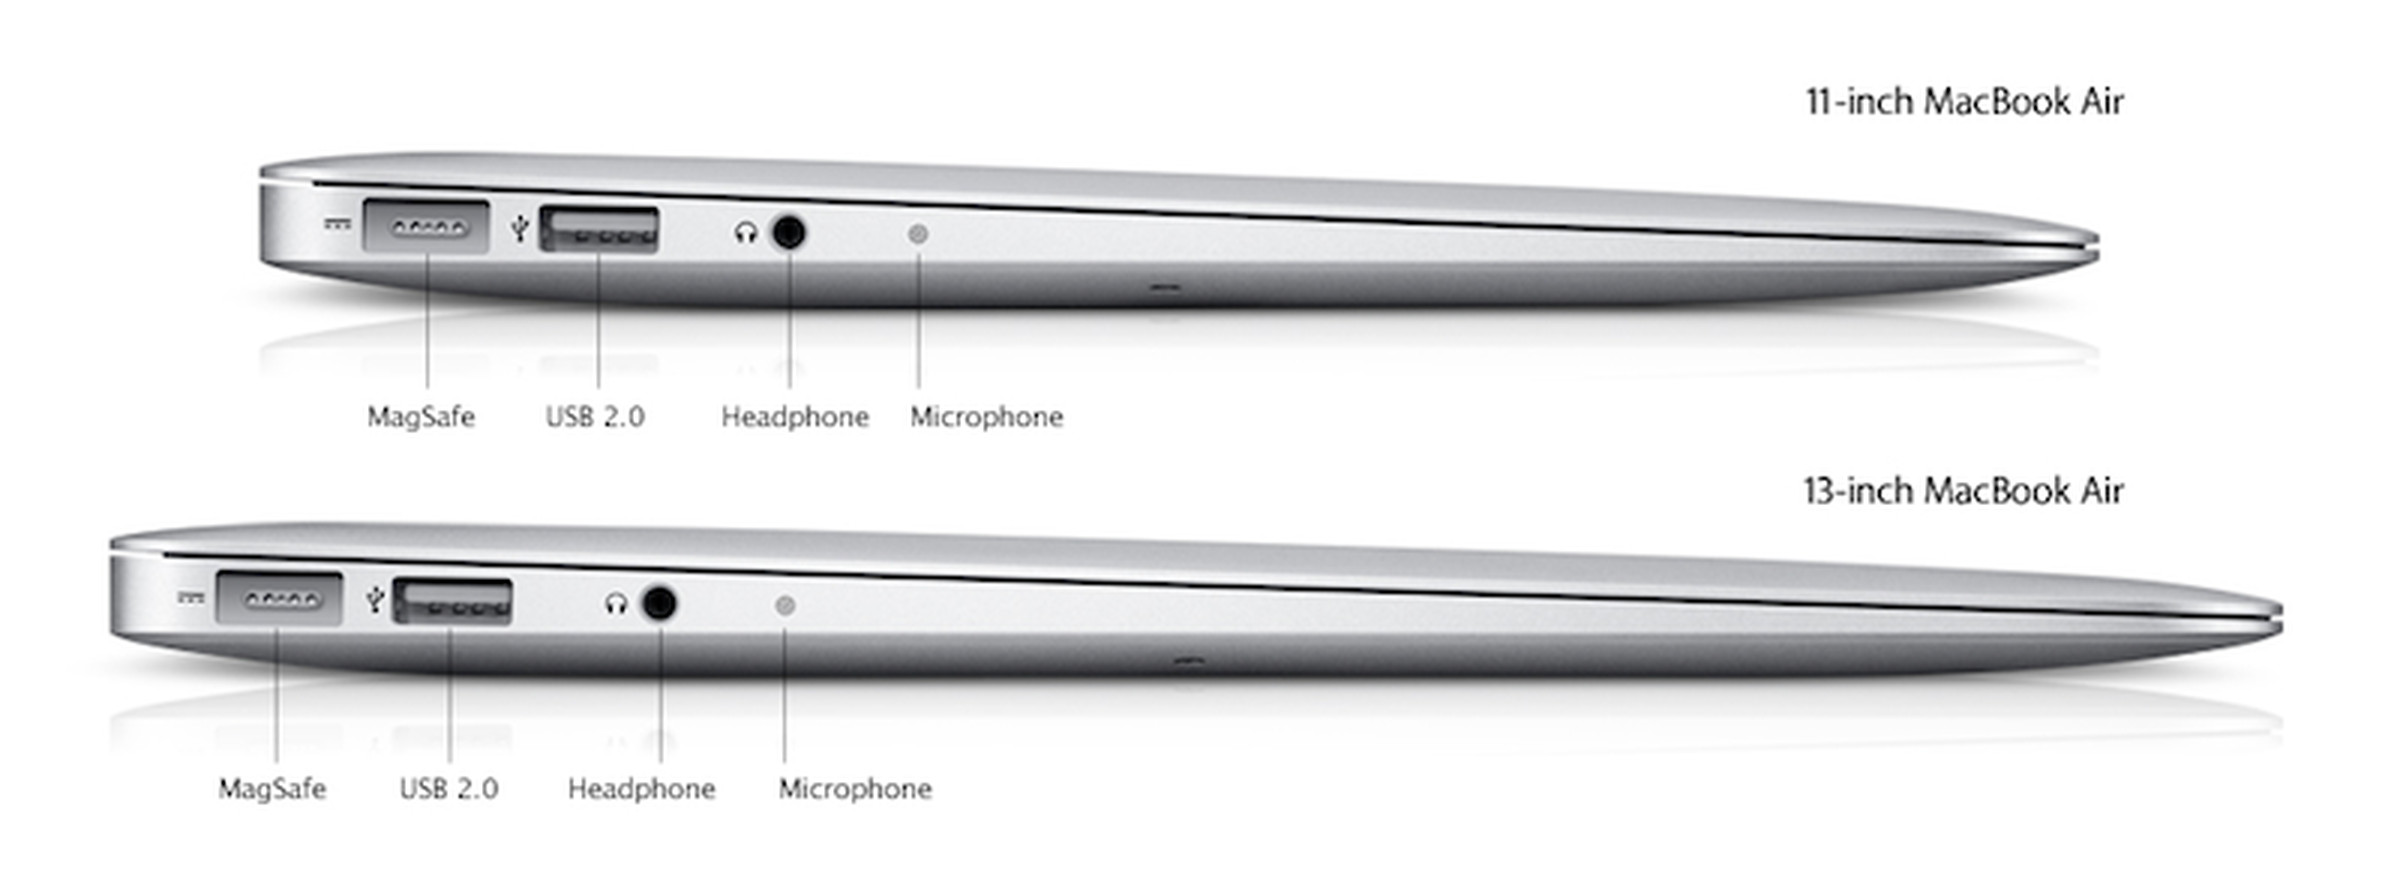 Apple MacBook Air updated with Sandy Bridge processors, Thunderbolt, and backlit keyboards